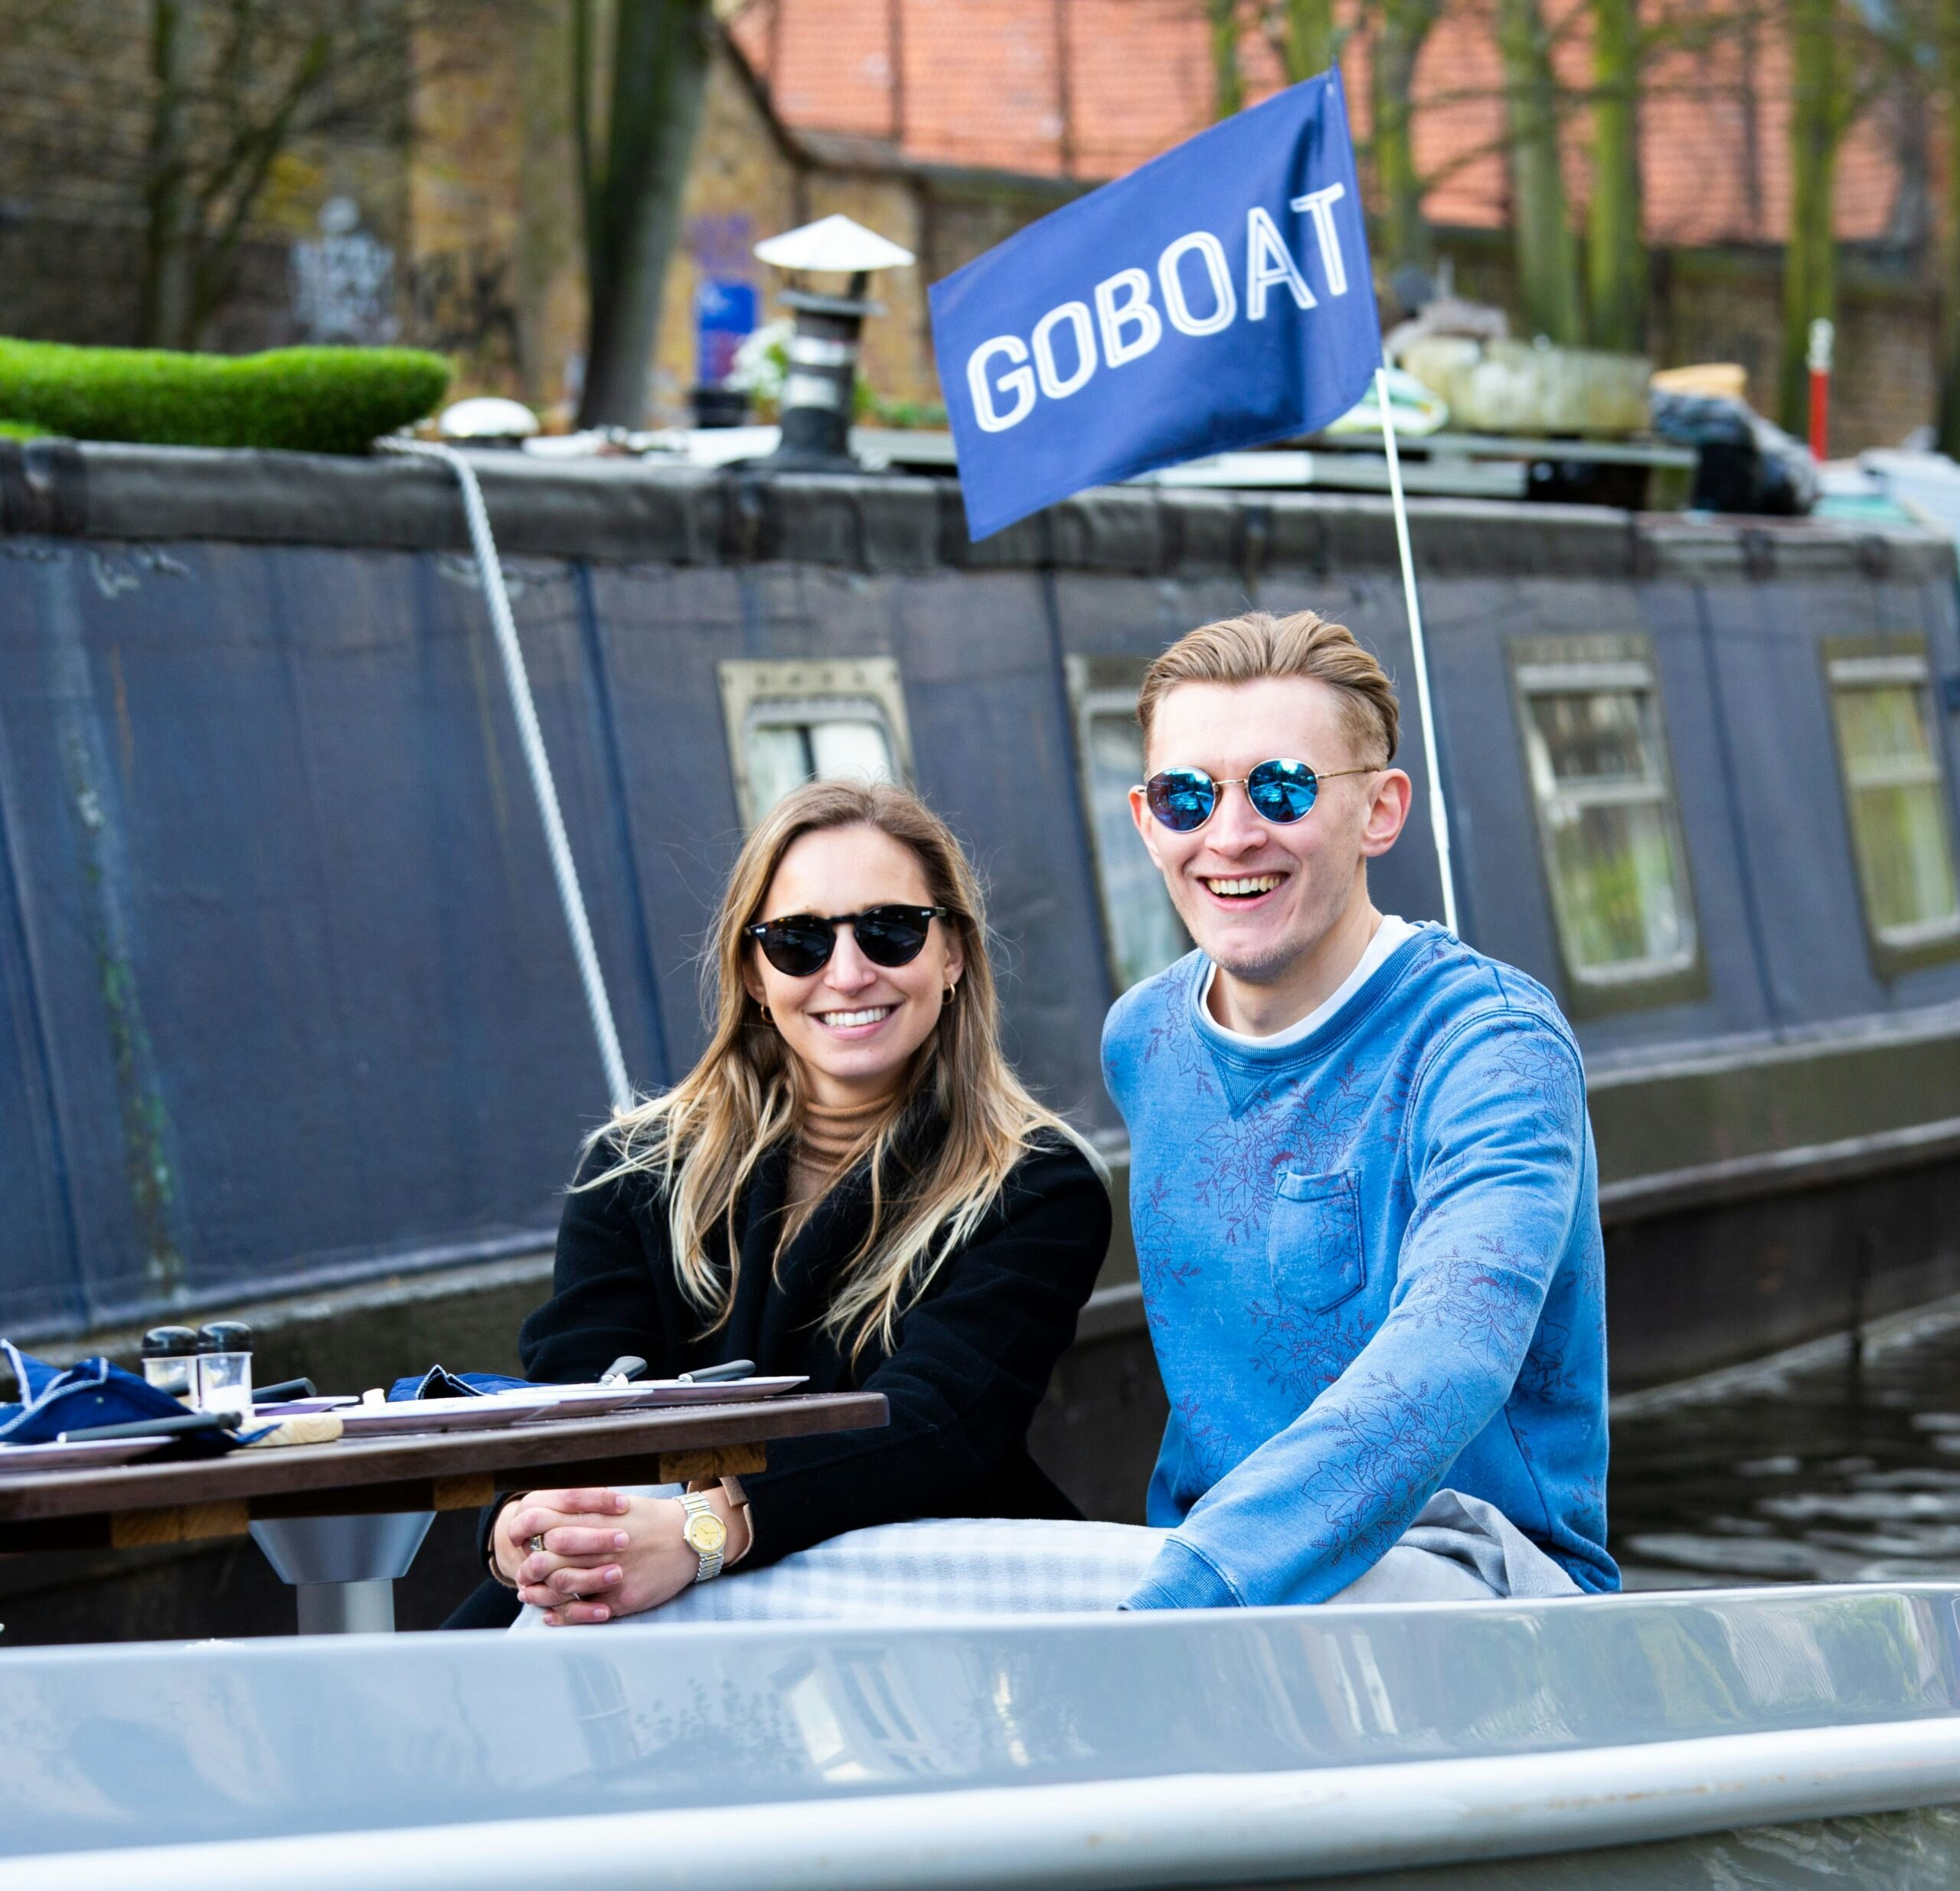 Couple on a GoBoat smiling in Paddington Basin canal trip